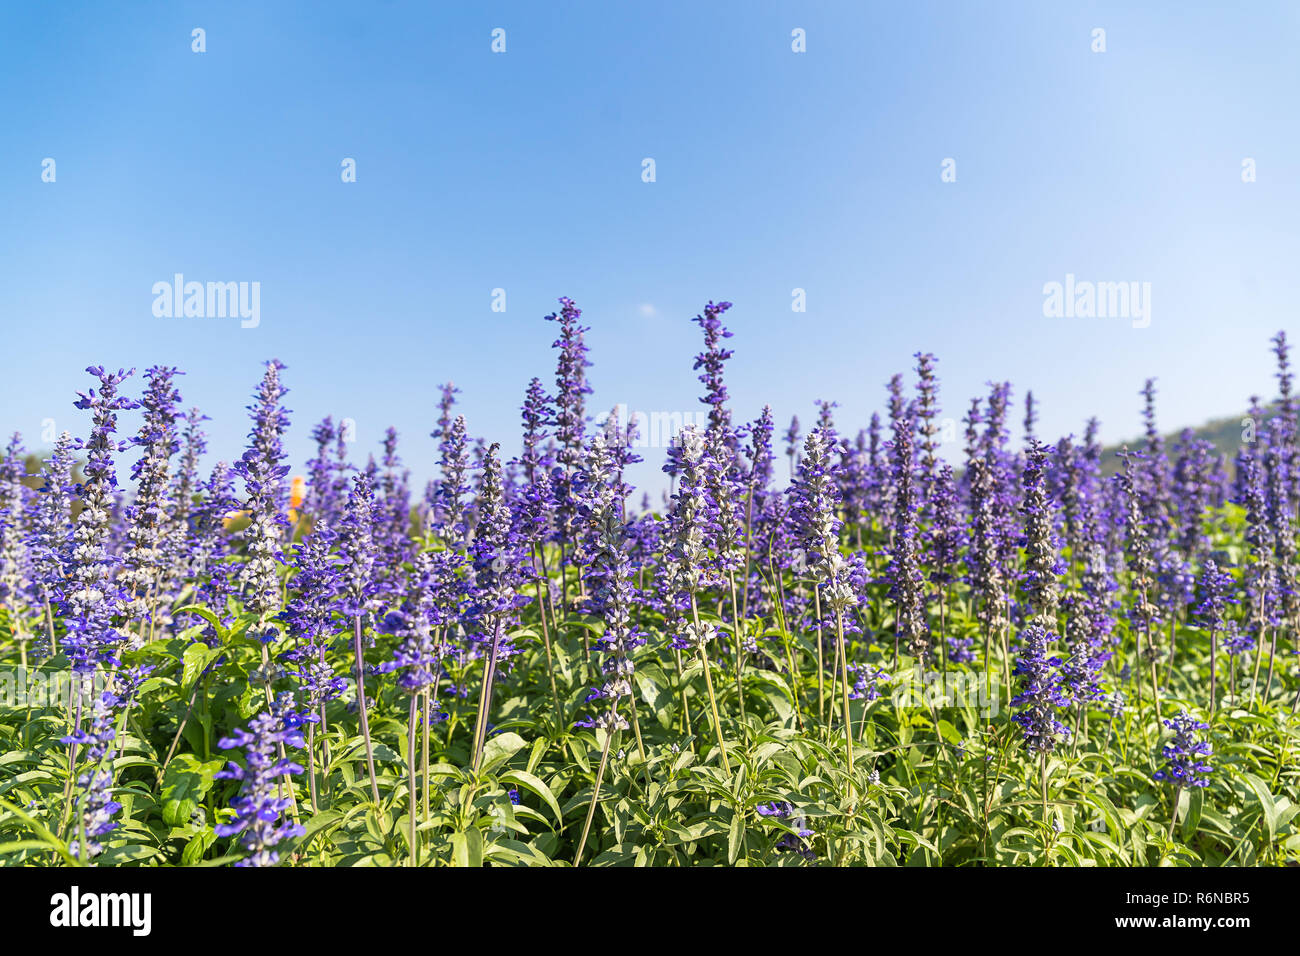 Blue Salvia flowers blooming in the garden Stock Photo